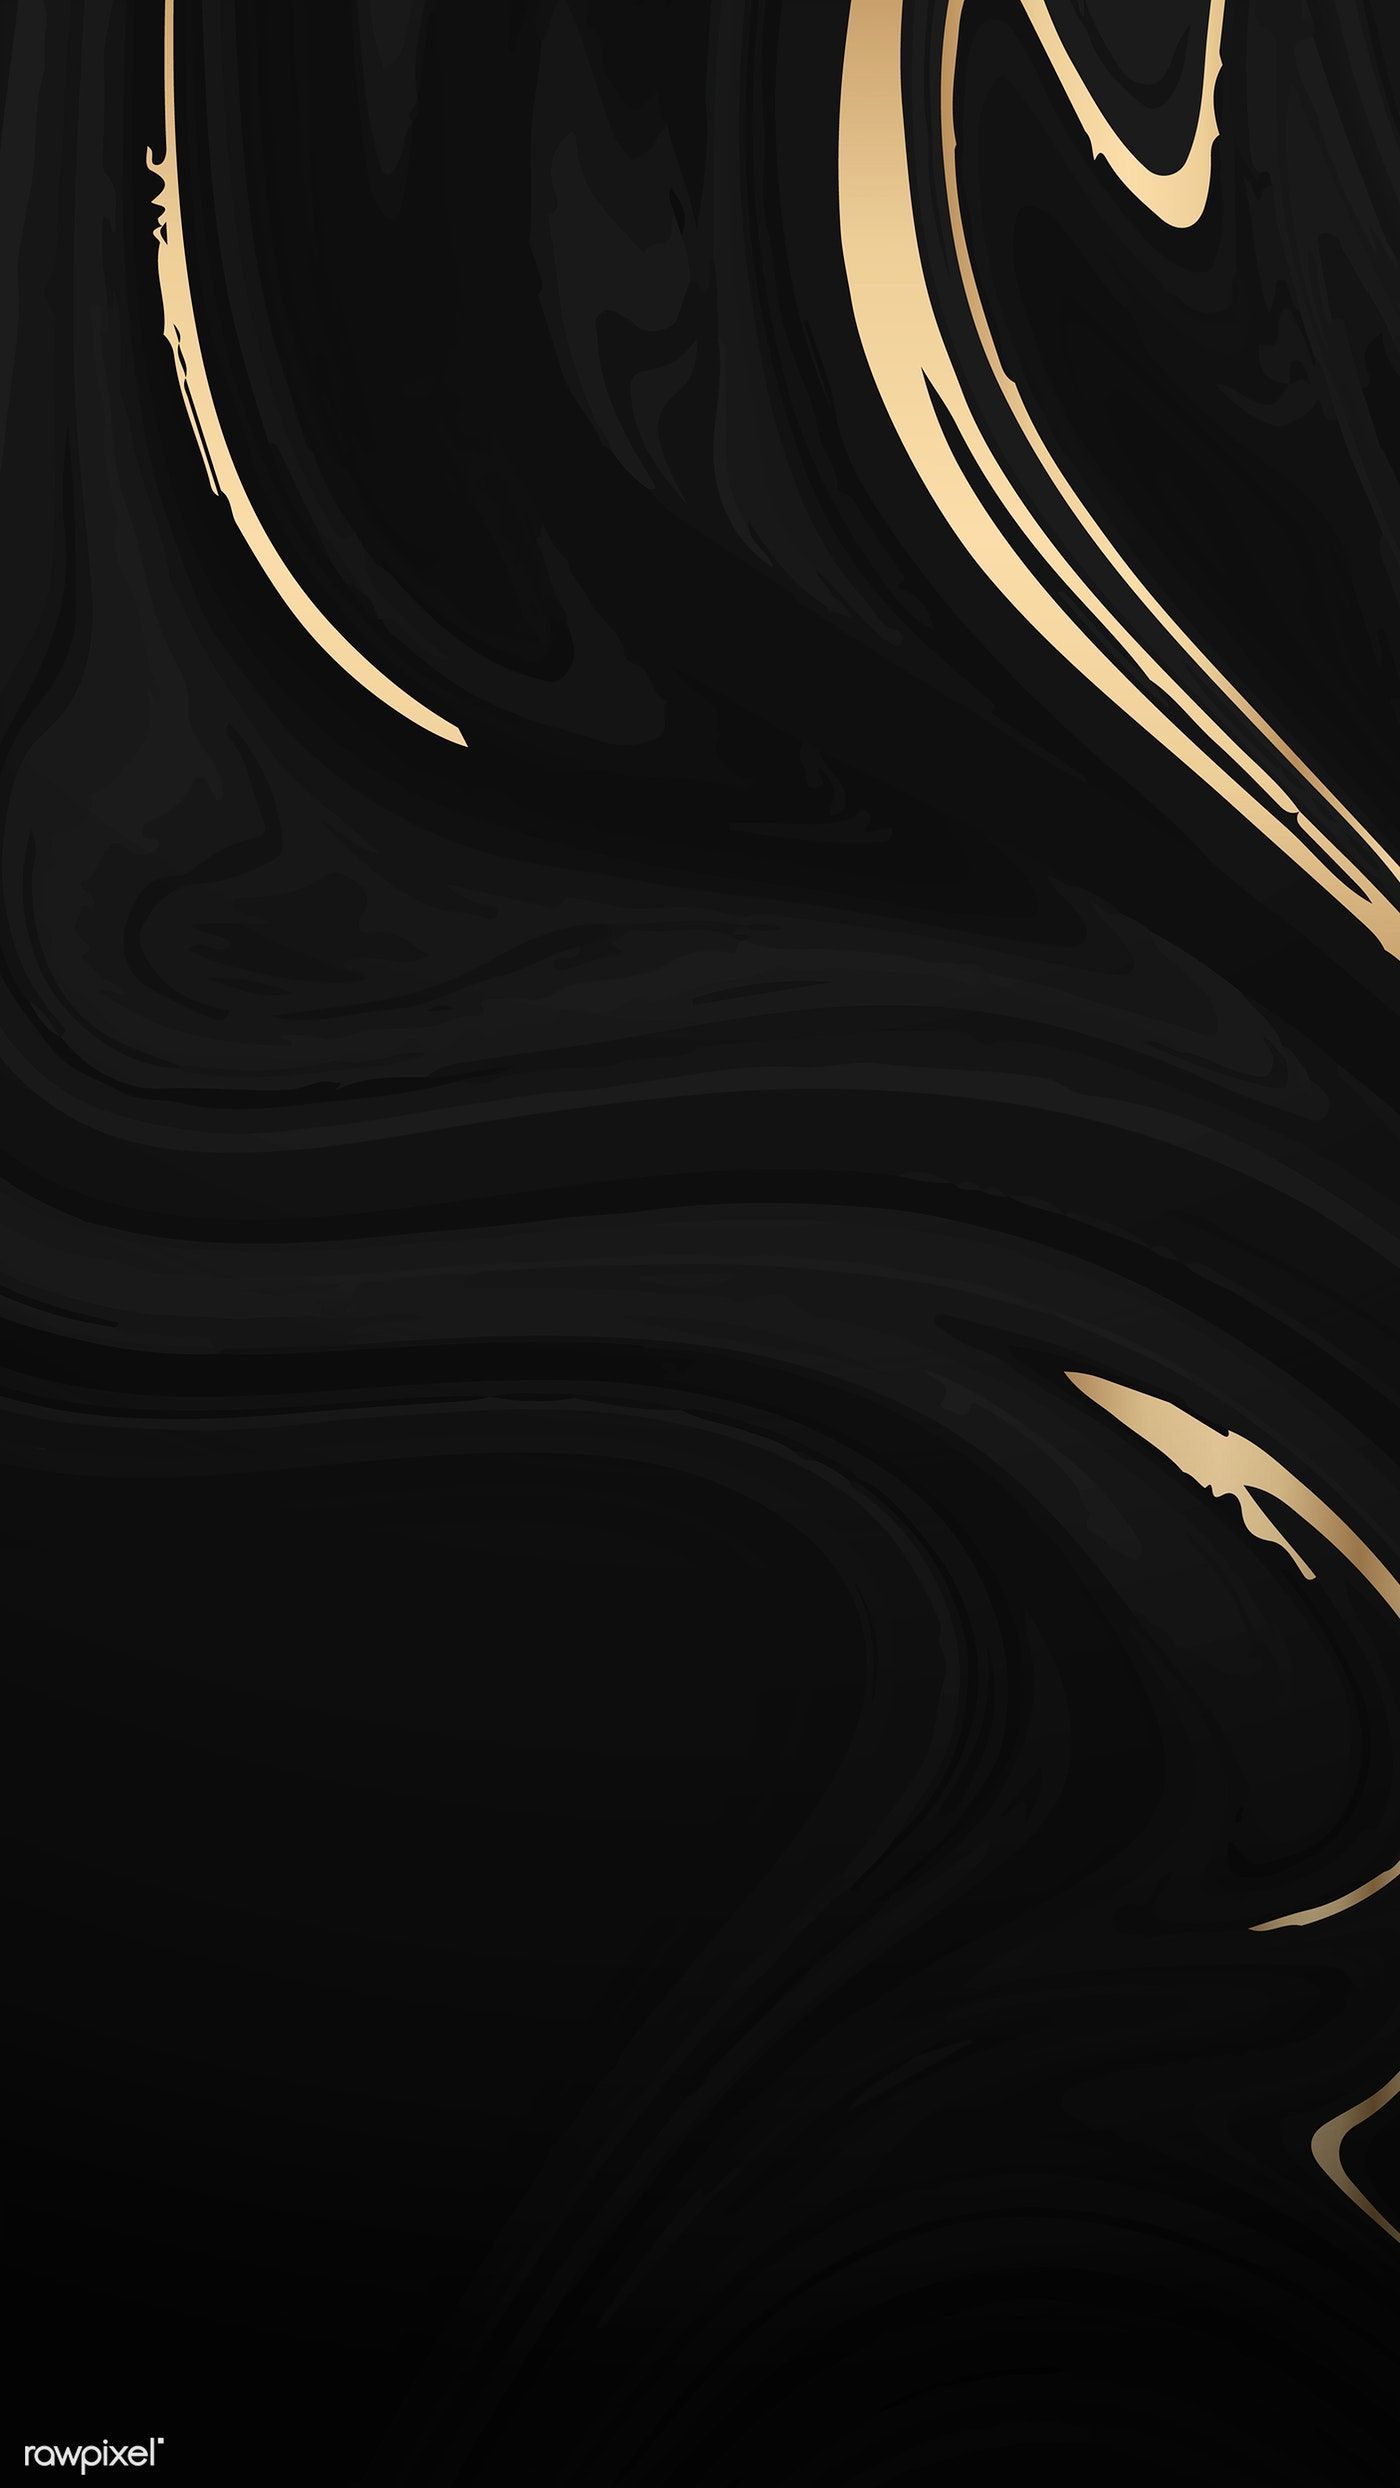 Download premium vector of Gold and black fluid patterned mobile phone. Gold and black background, Phone wallpaper patterns, Gold and black wallpaper